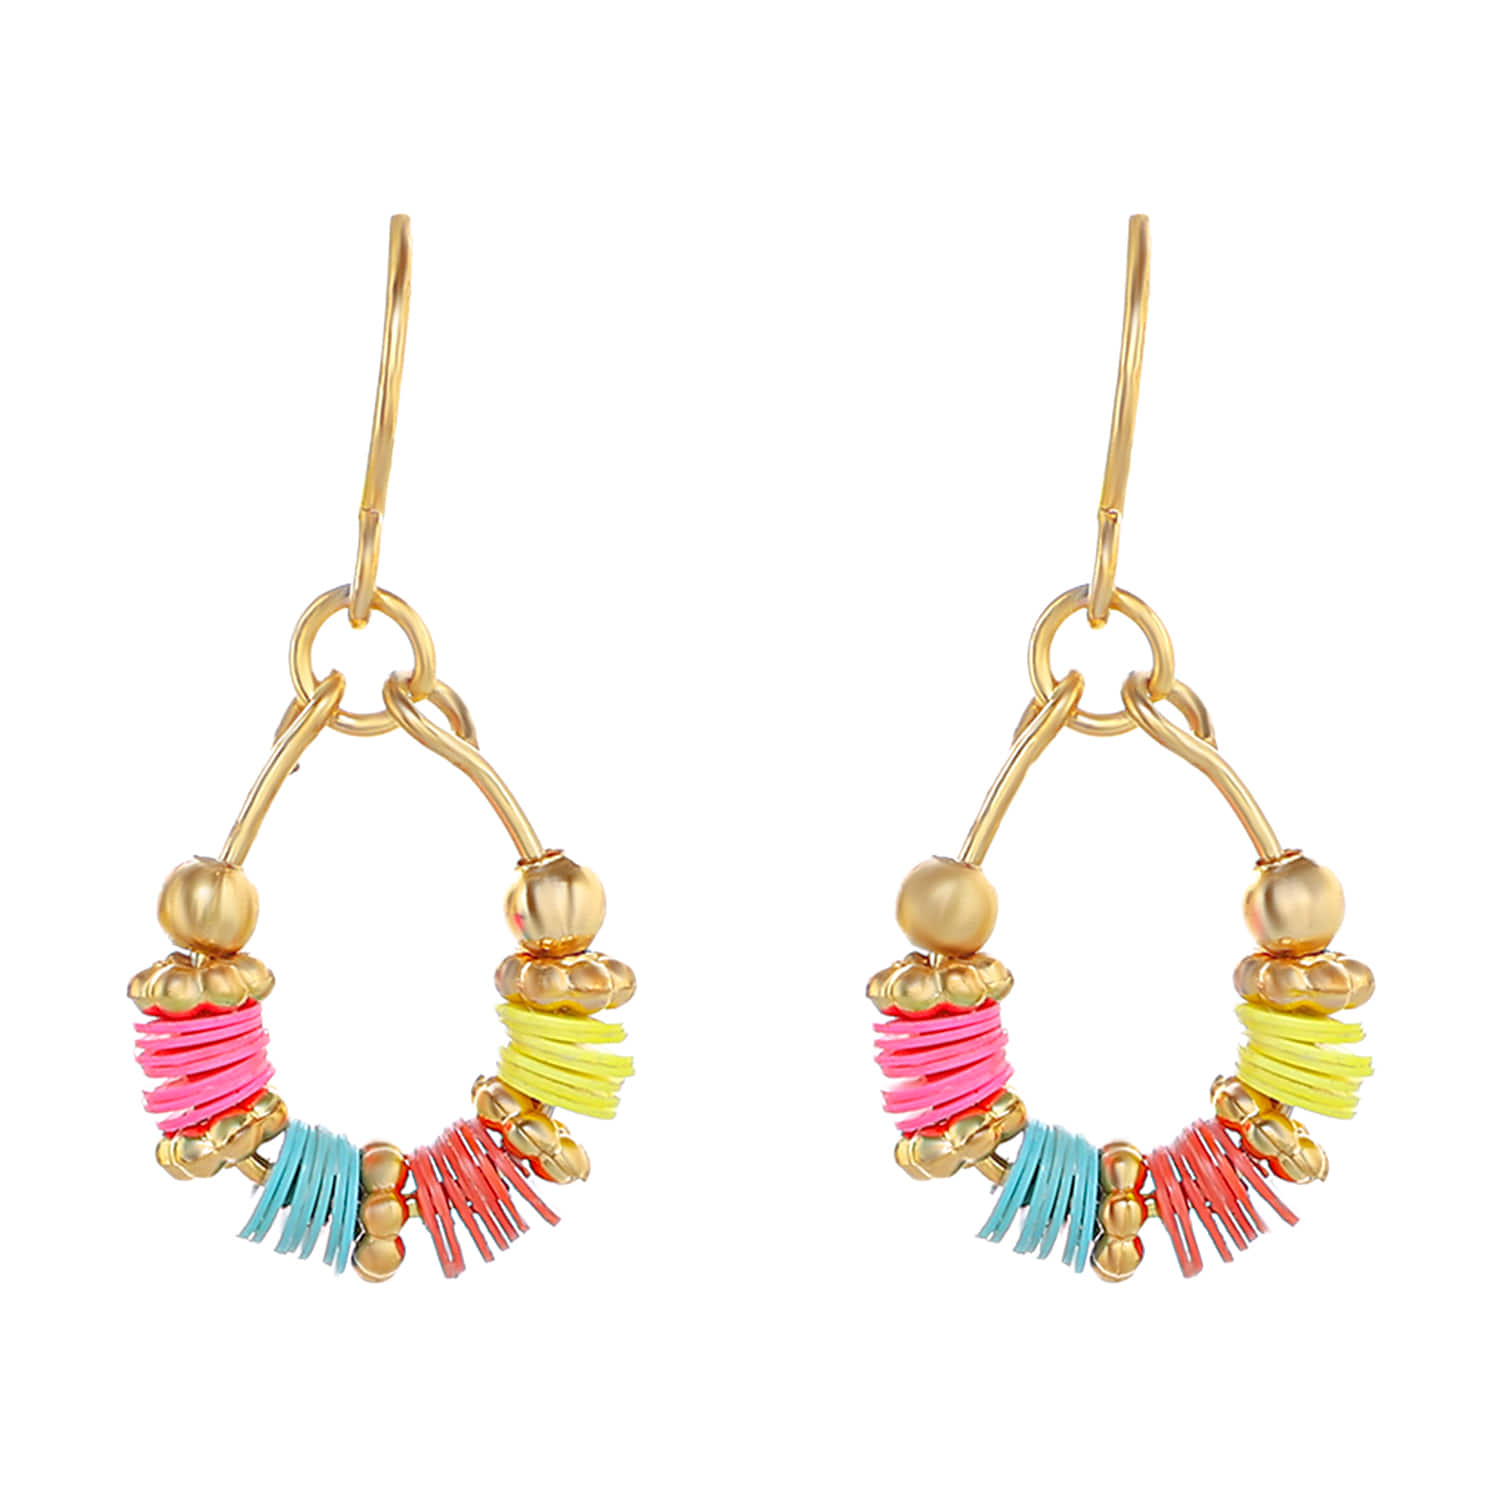 Husar's House of Fine Diamonds. 14kt Yellow Gold Cascading Natural Multi- Color Gemstone Dangle Earrings